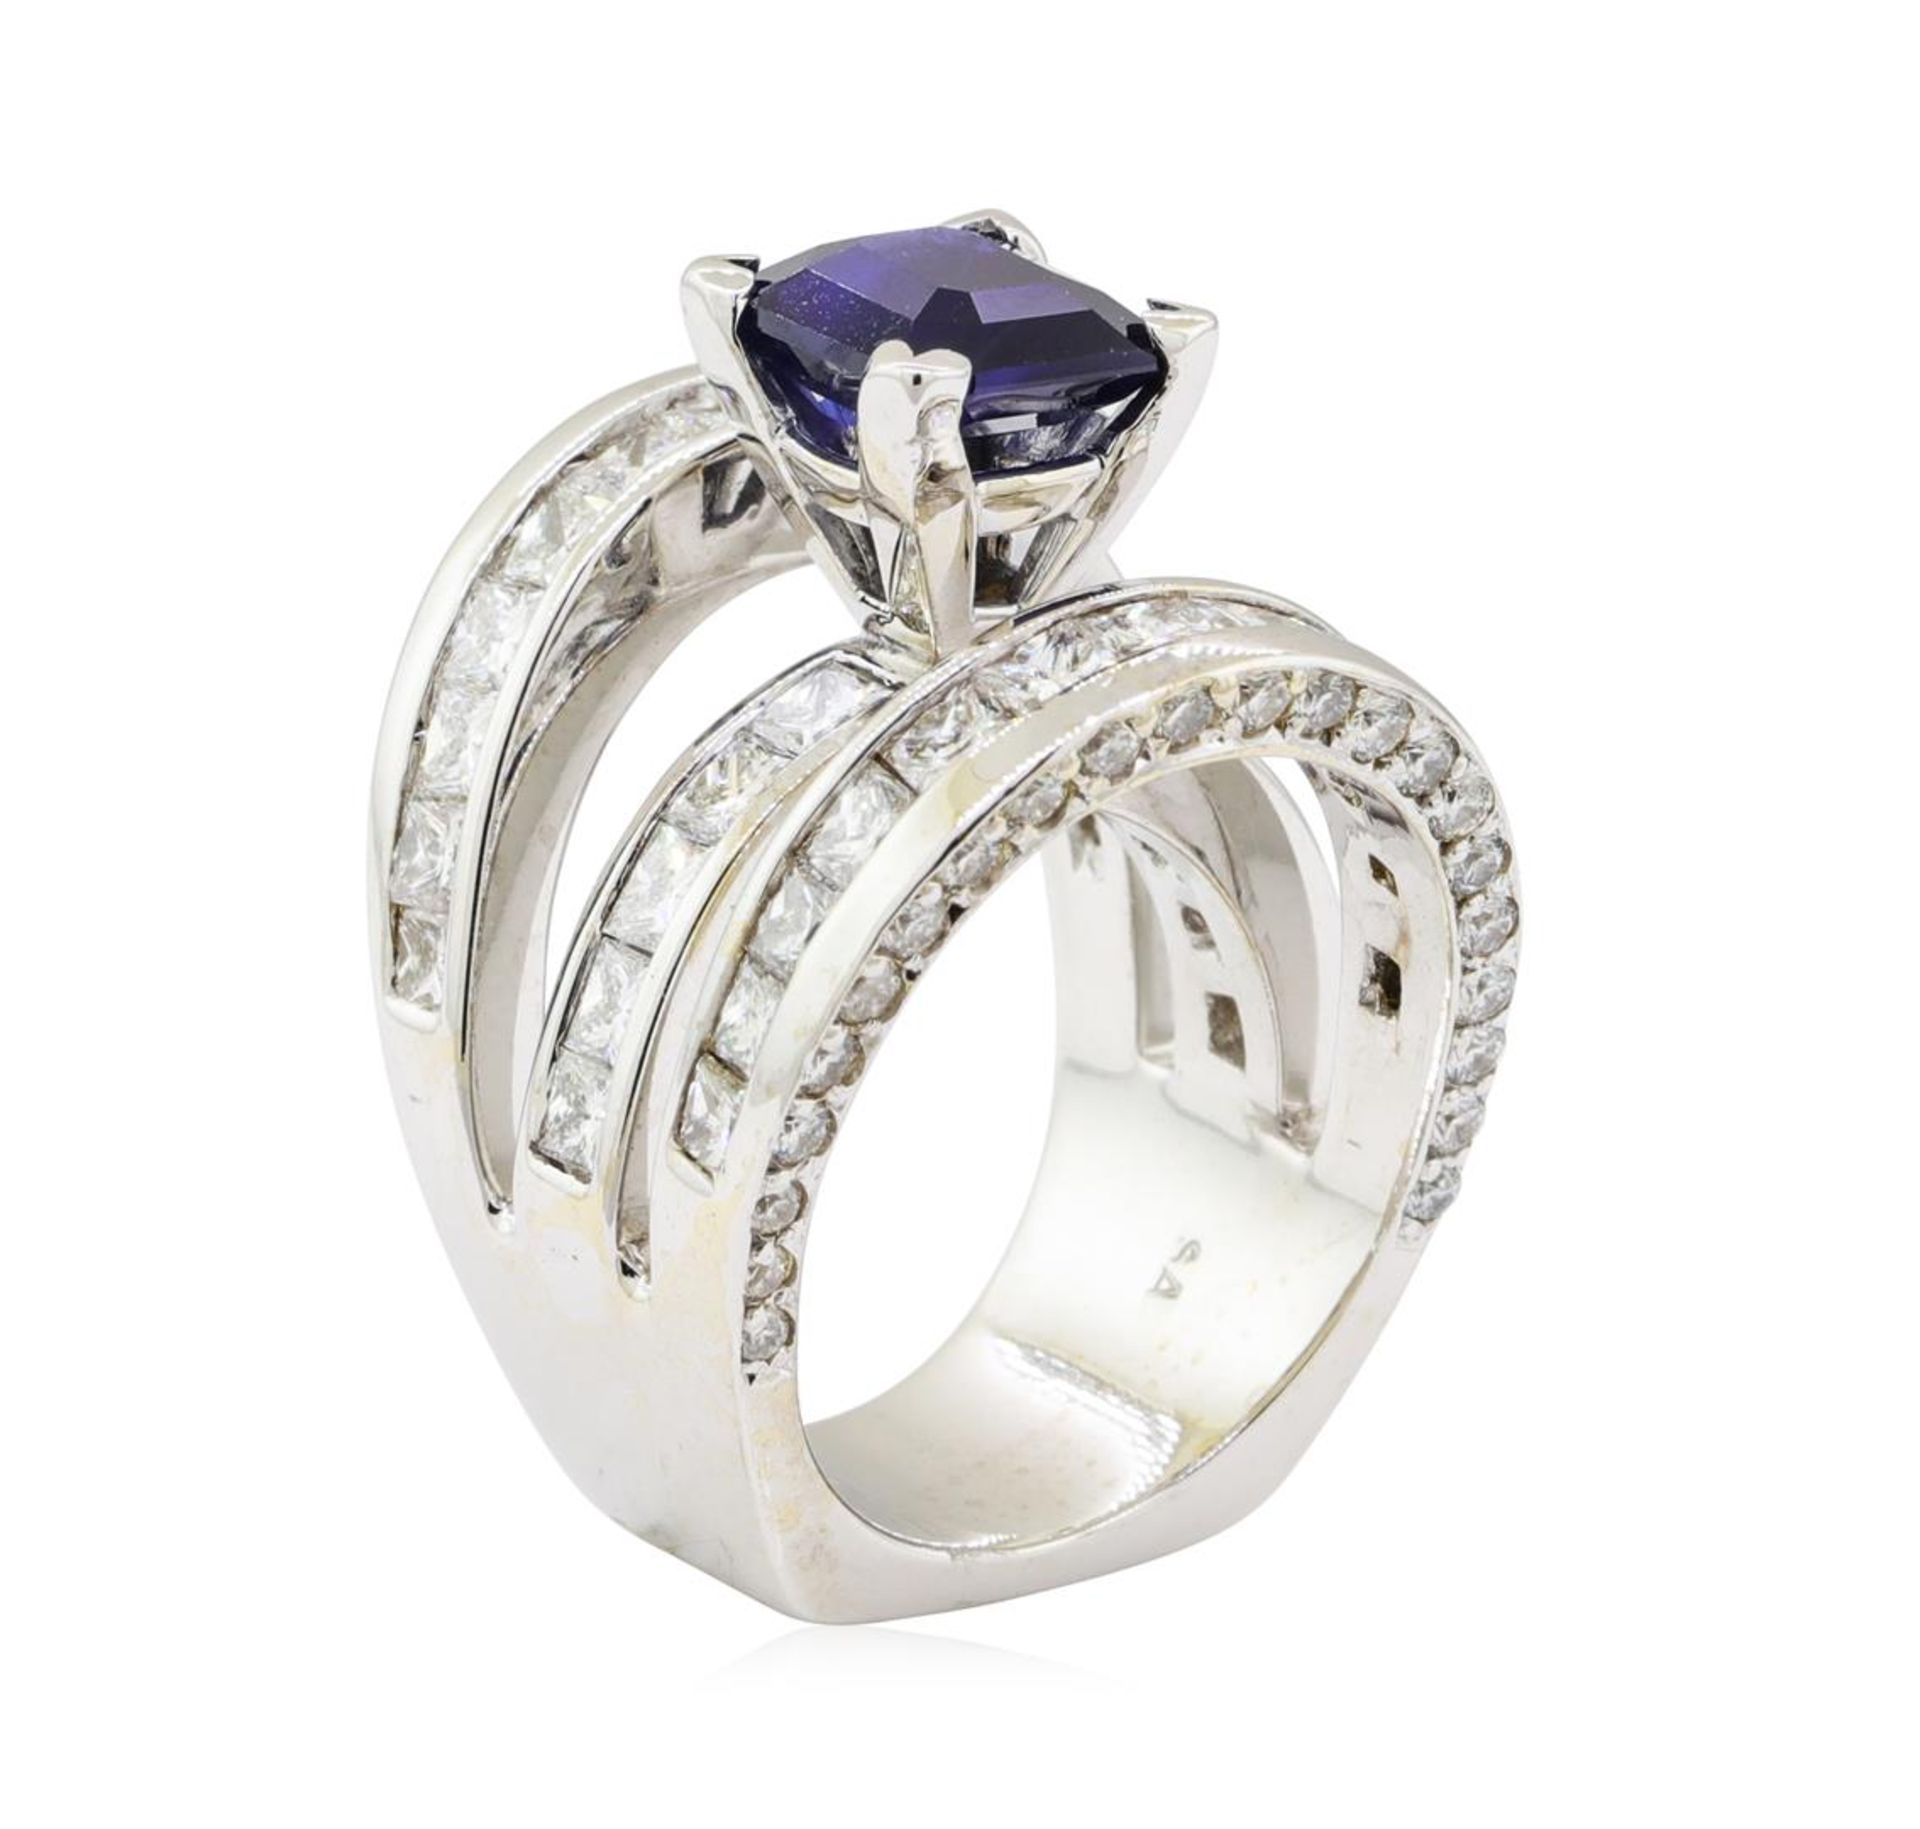 7.40 ctw Sapphire and Diamond Ring - 18KT White Gold - Image 4 of 5